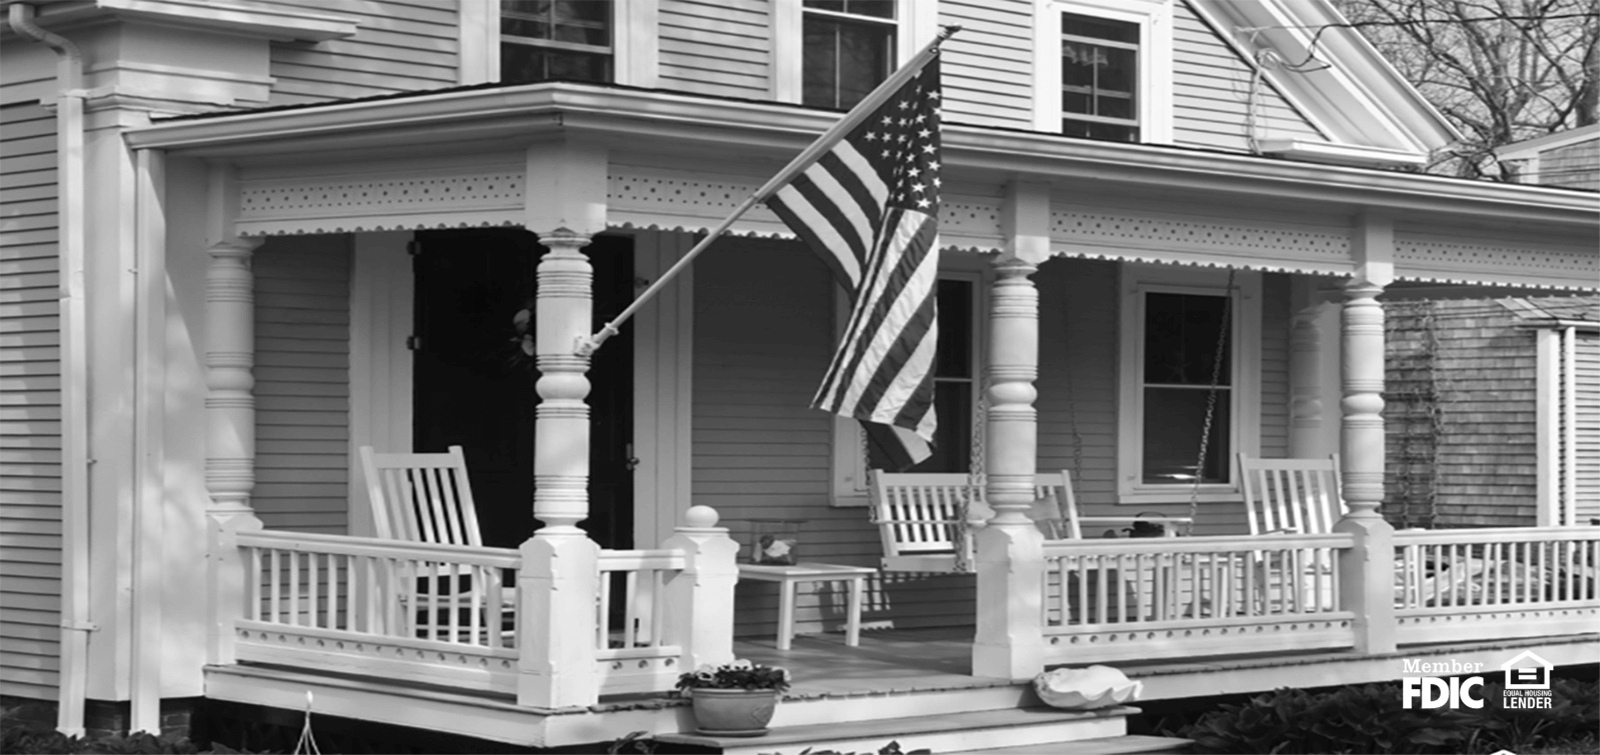 Beautiful Victorian style house with big front porch and an American flag flying 